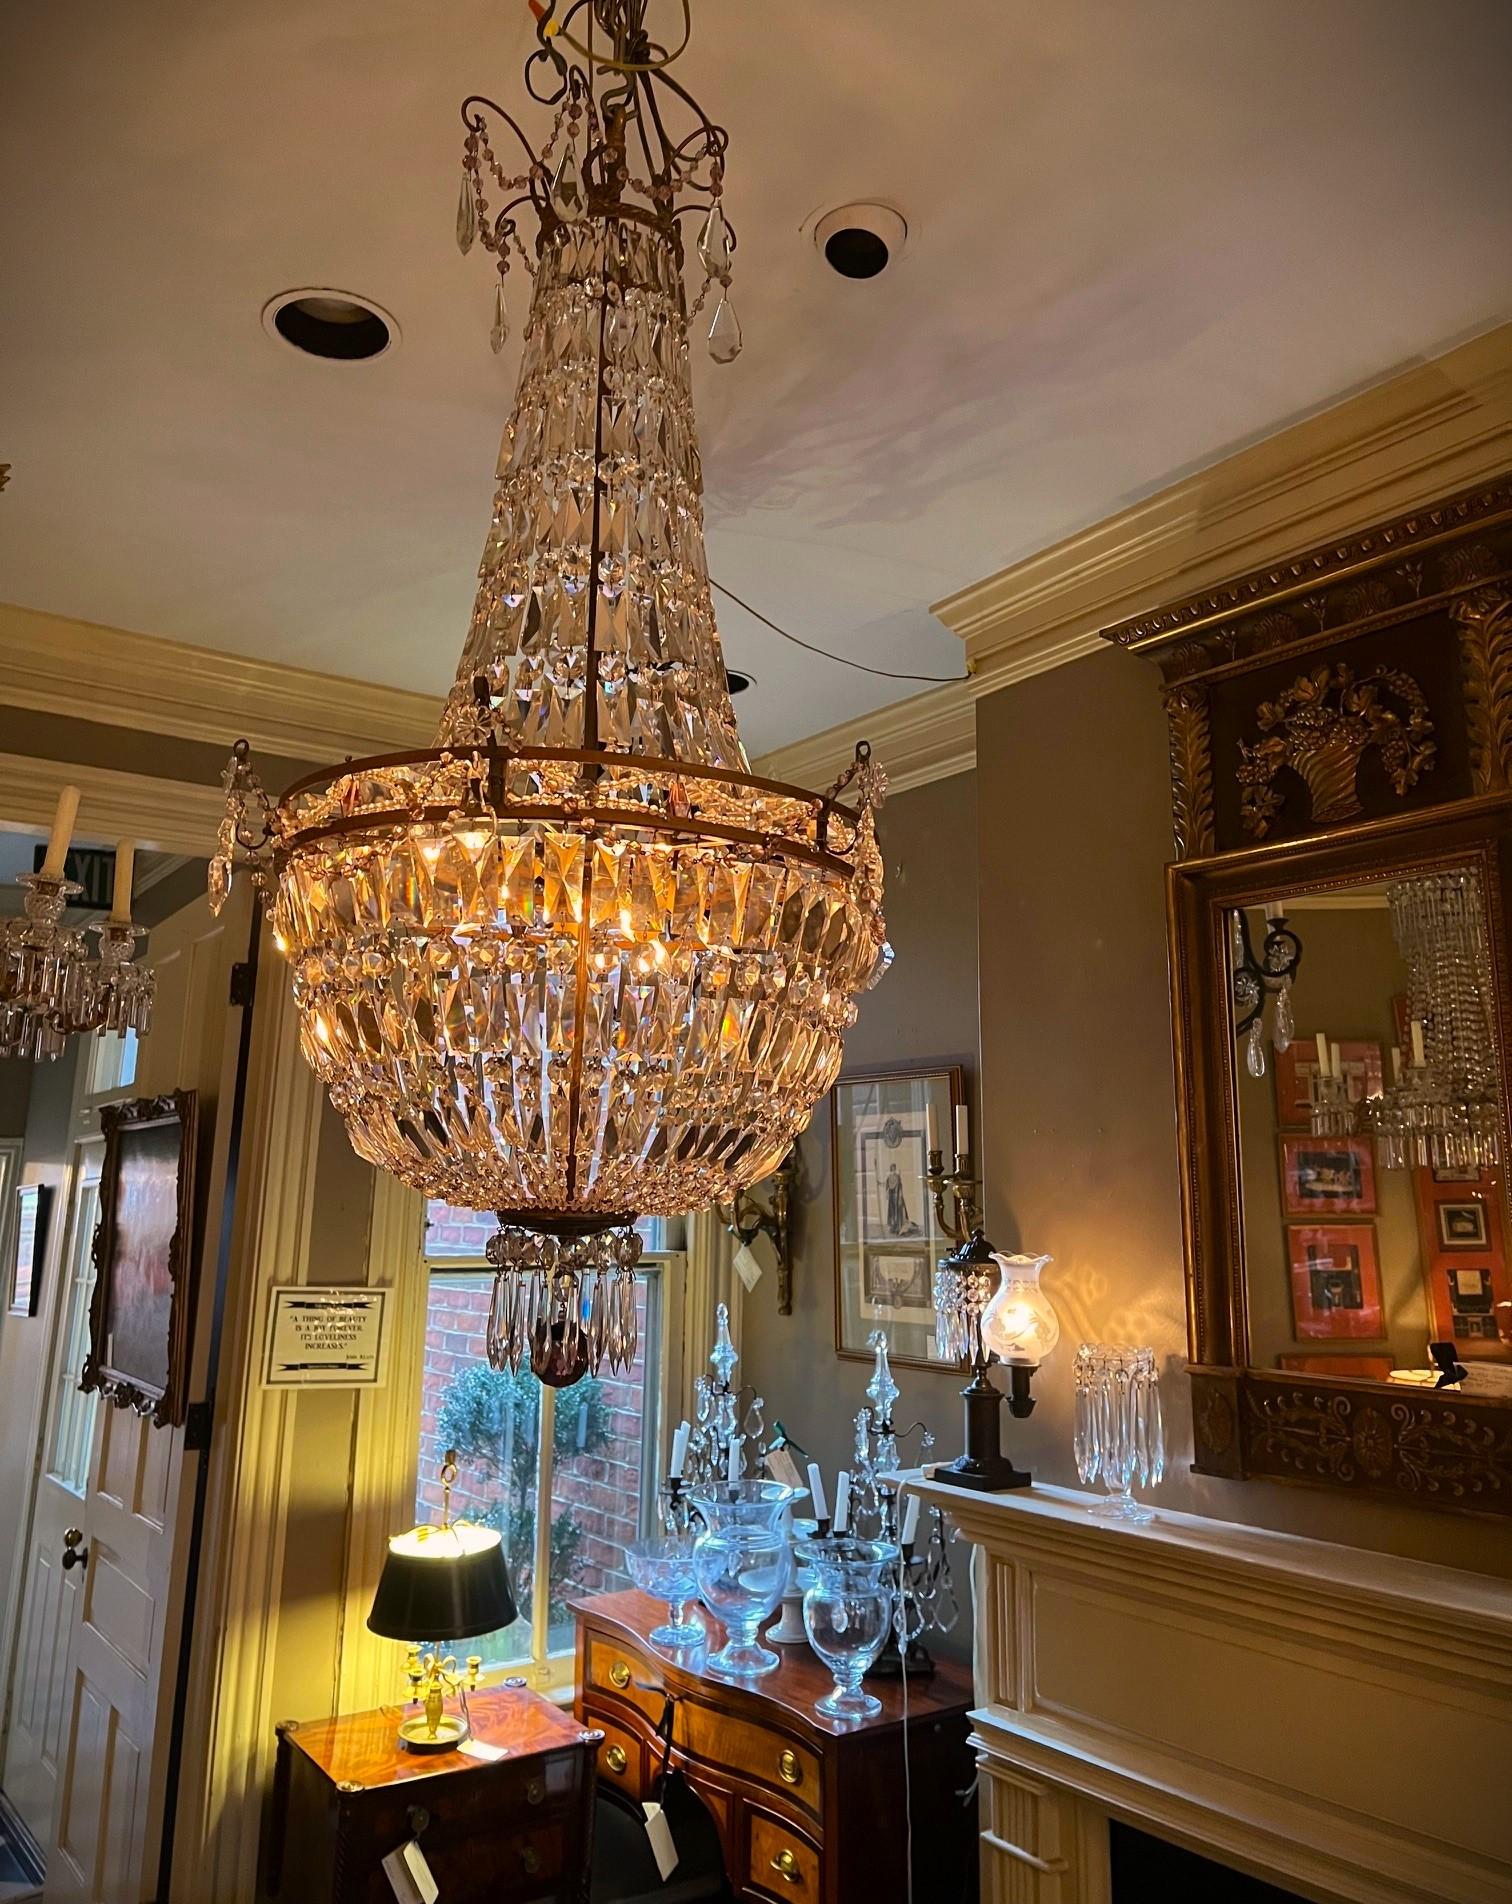 This armless tent-and-basket chandelier was hand crafted in the Empire style in Paris in the early days of electrified light fixtures. Inside the bronze frame, hidden by the tent of crystal buttons & baguette prisms, are 6 lights attached to a